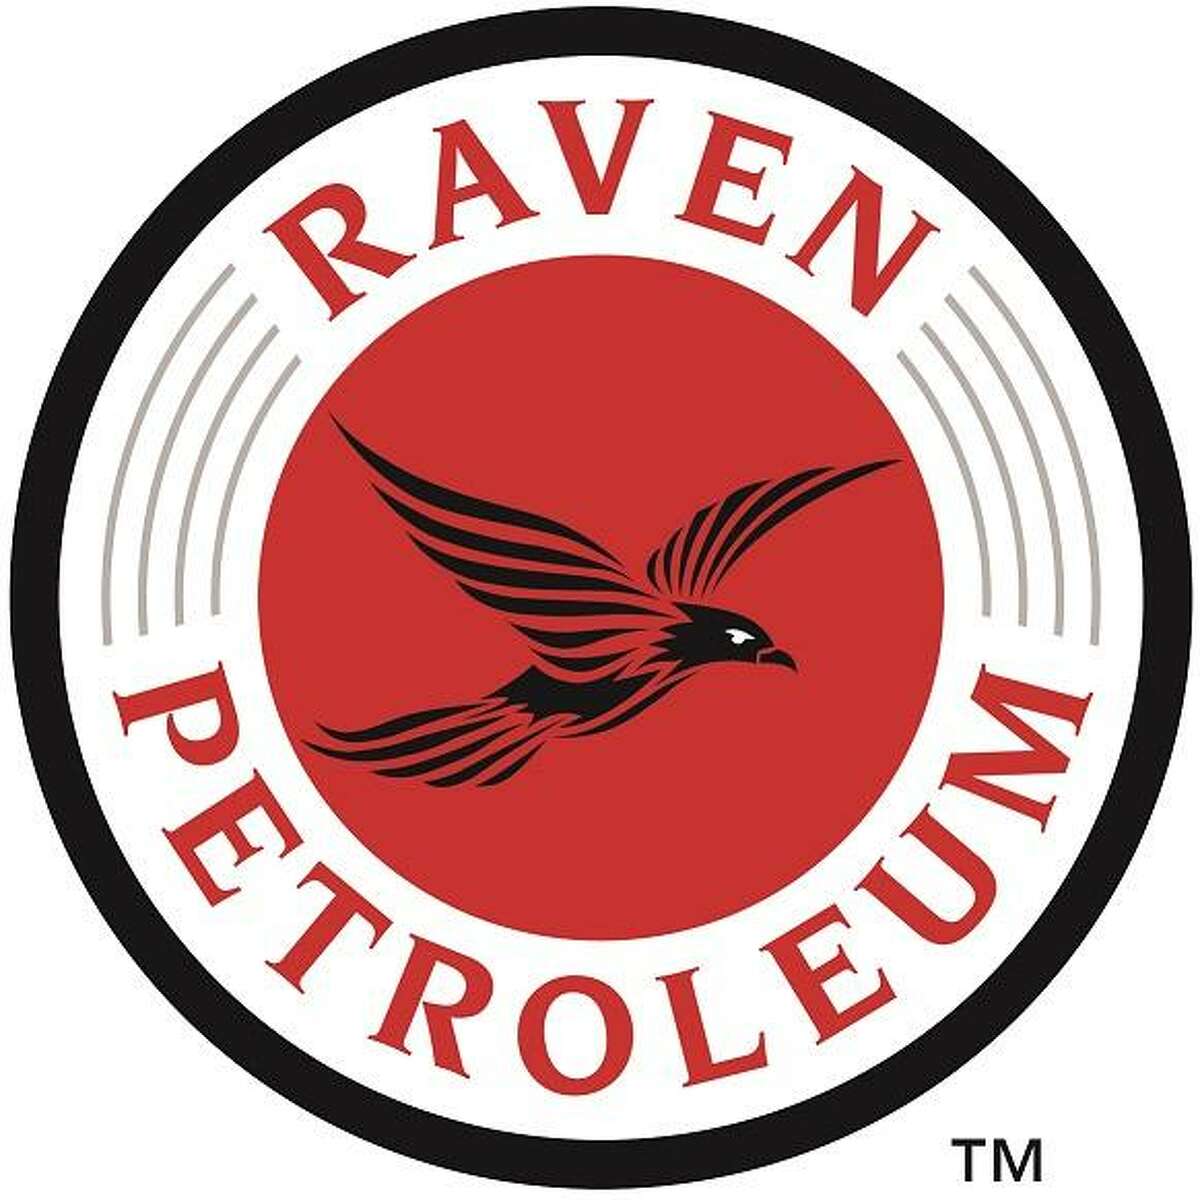 The oil processed by Raven Petroleum’s refinery will come from South Texas’ Eagle Ford. The light sweet crude is a higher grade petroleum compared to heavy crude oil produced in the Mexico, the Middle East and Venezuela.